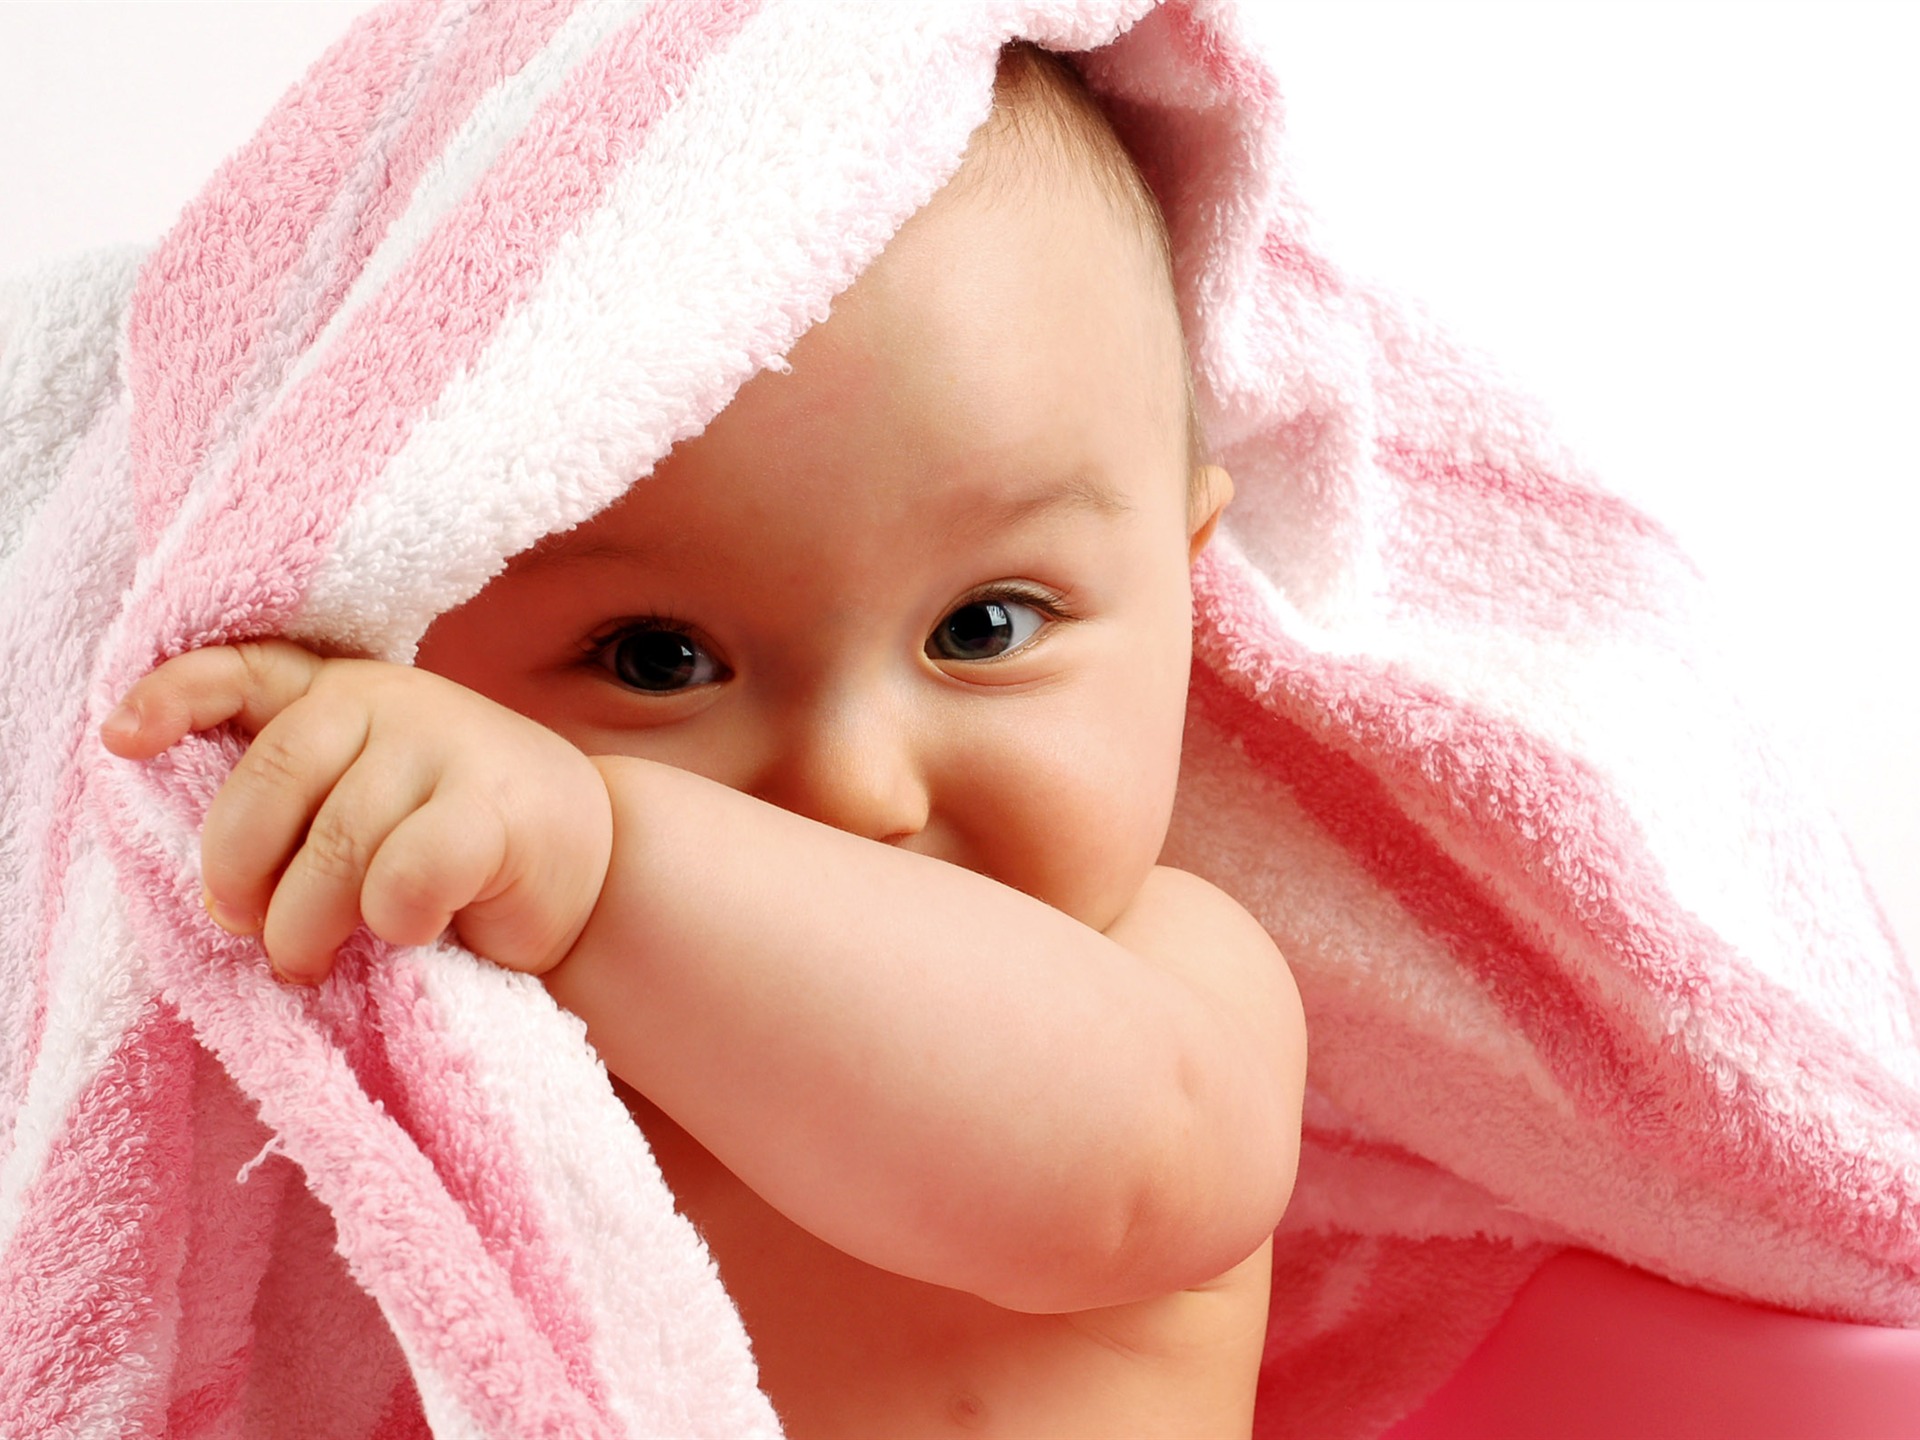 Cute Baby Wallpapers (3) #1 - 1920x1440